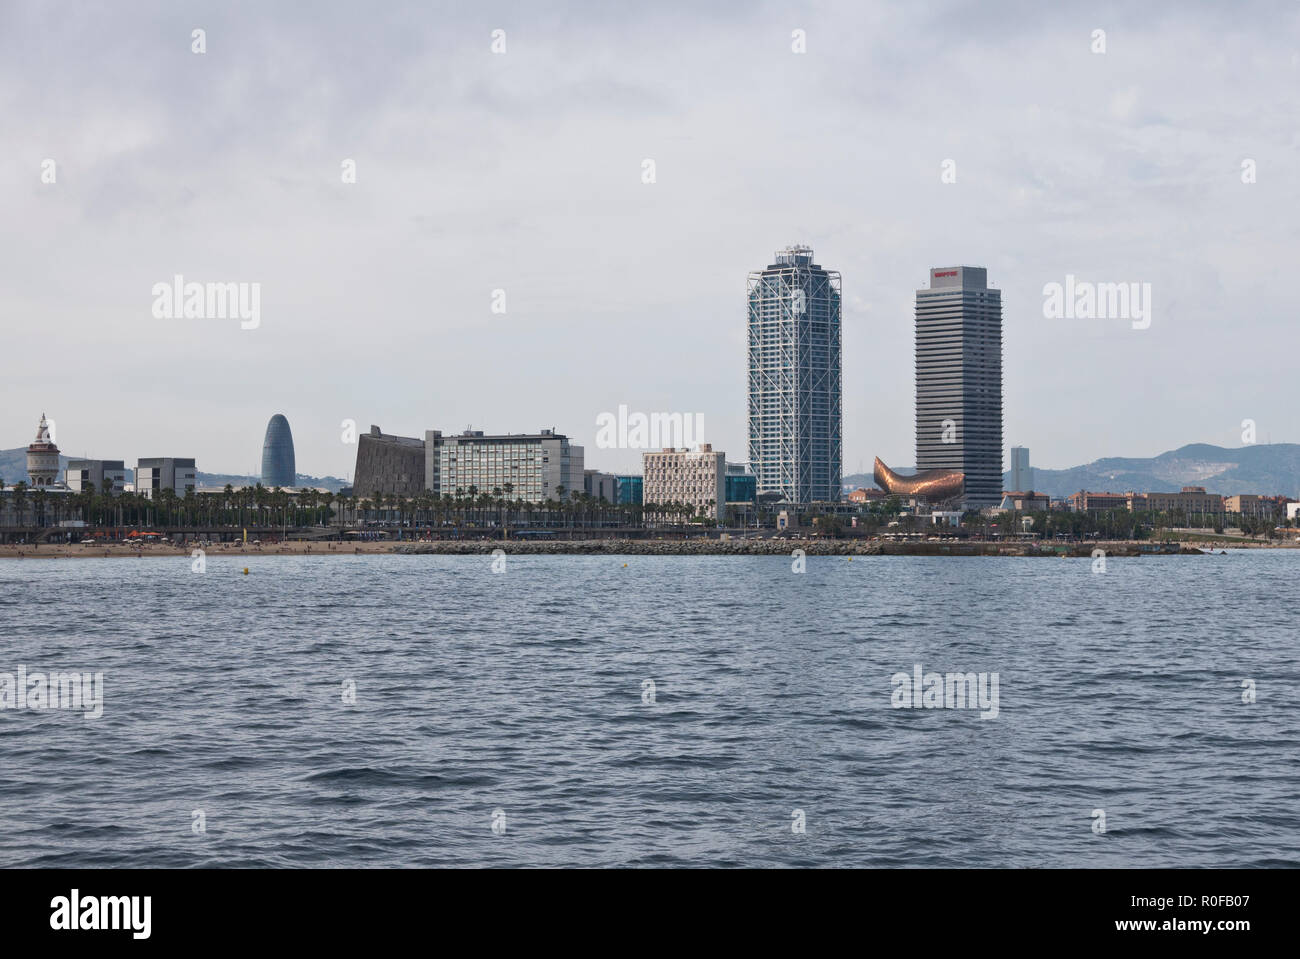 A scenic view of the beach in Barcelona, Spain Stock Photo